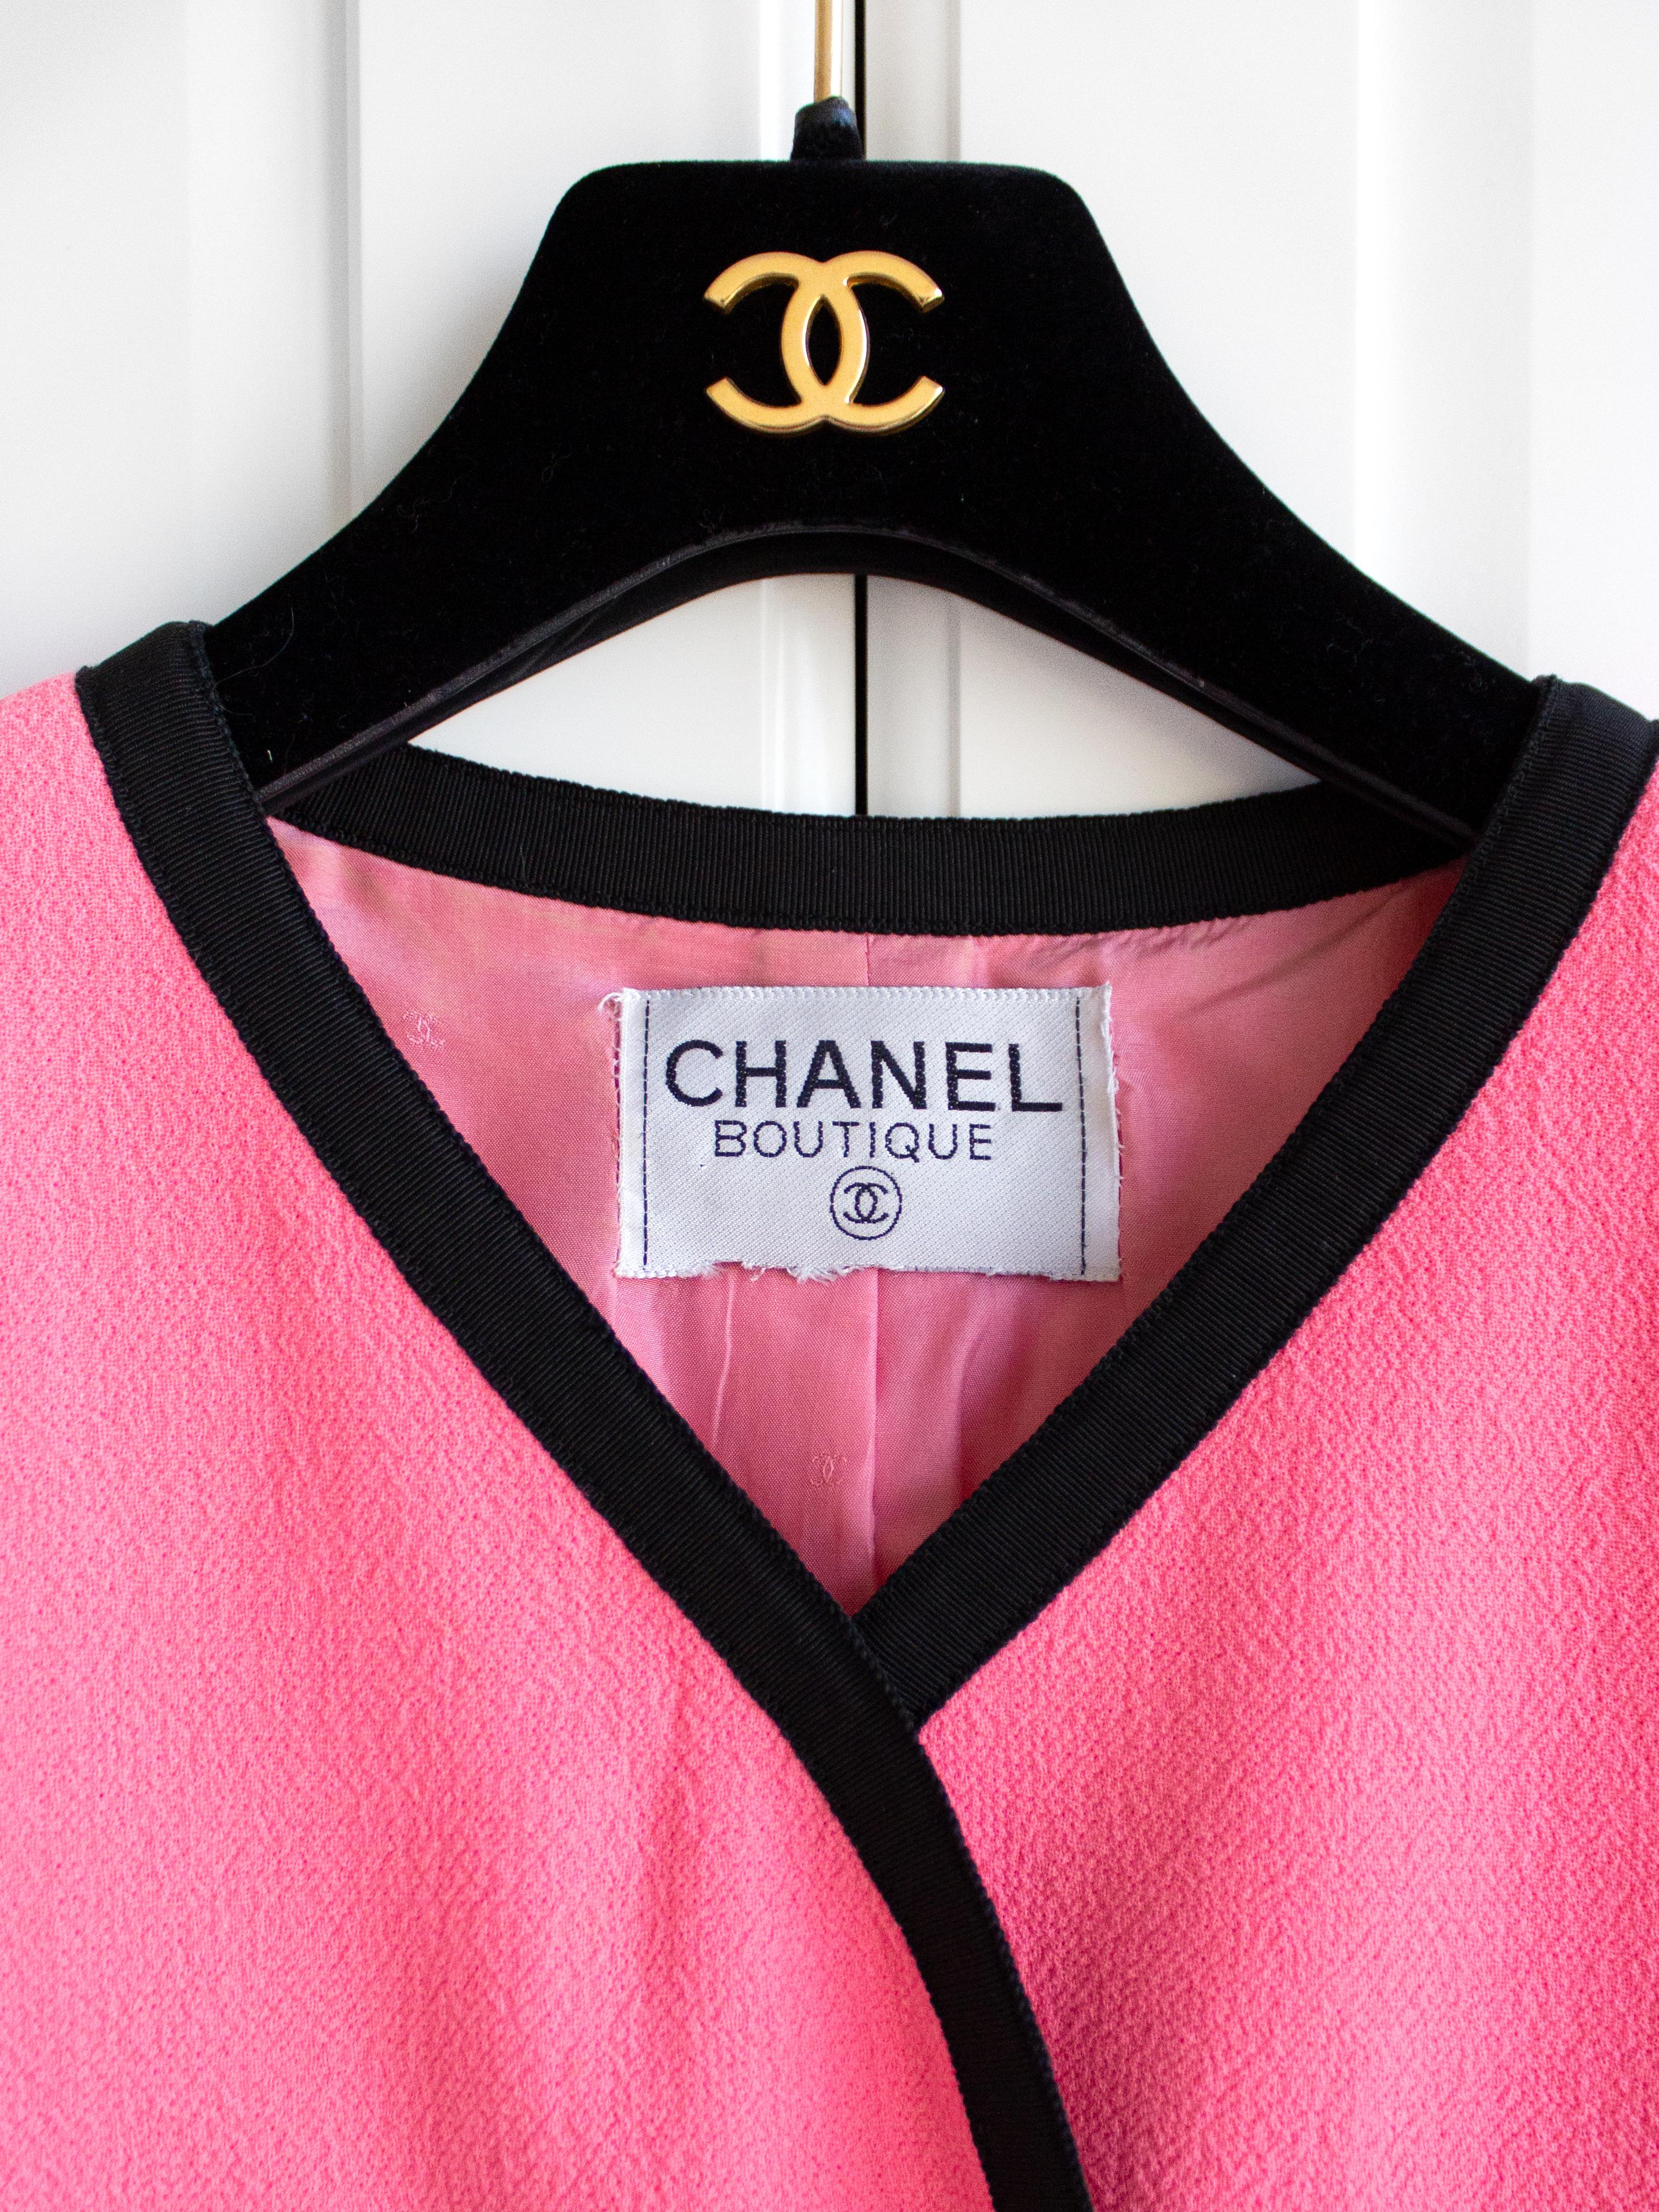 marge chanel suit